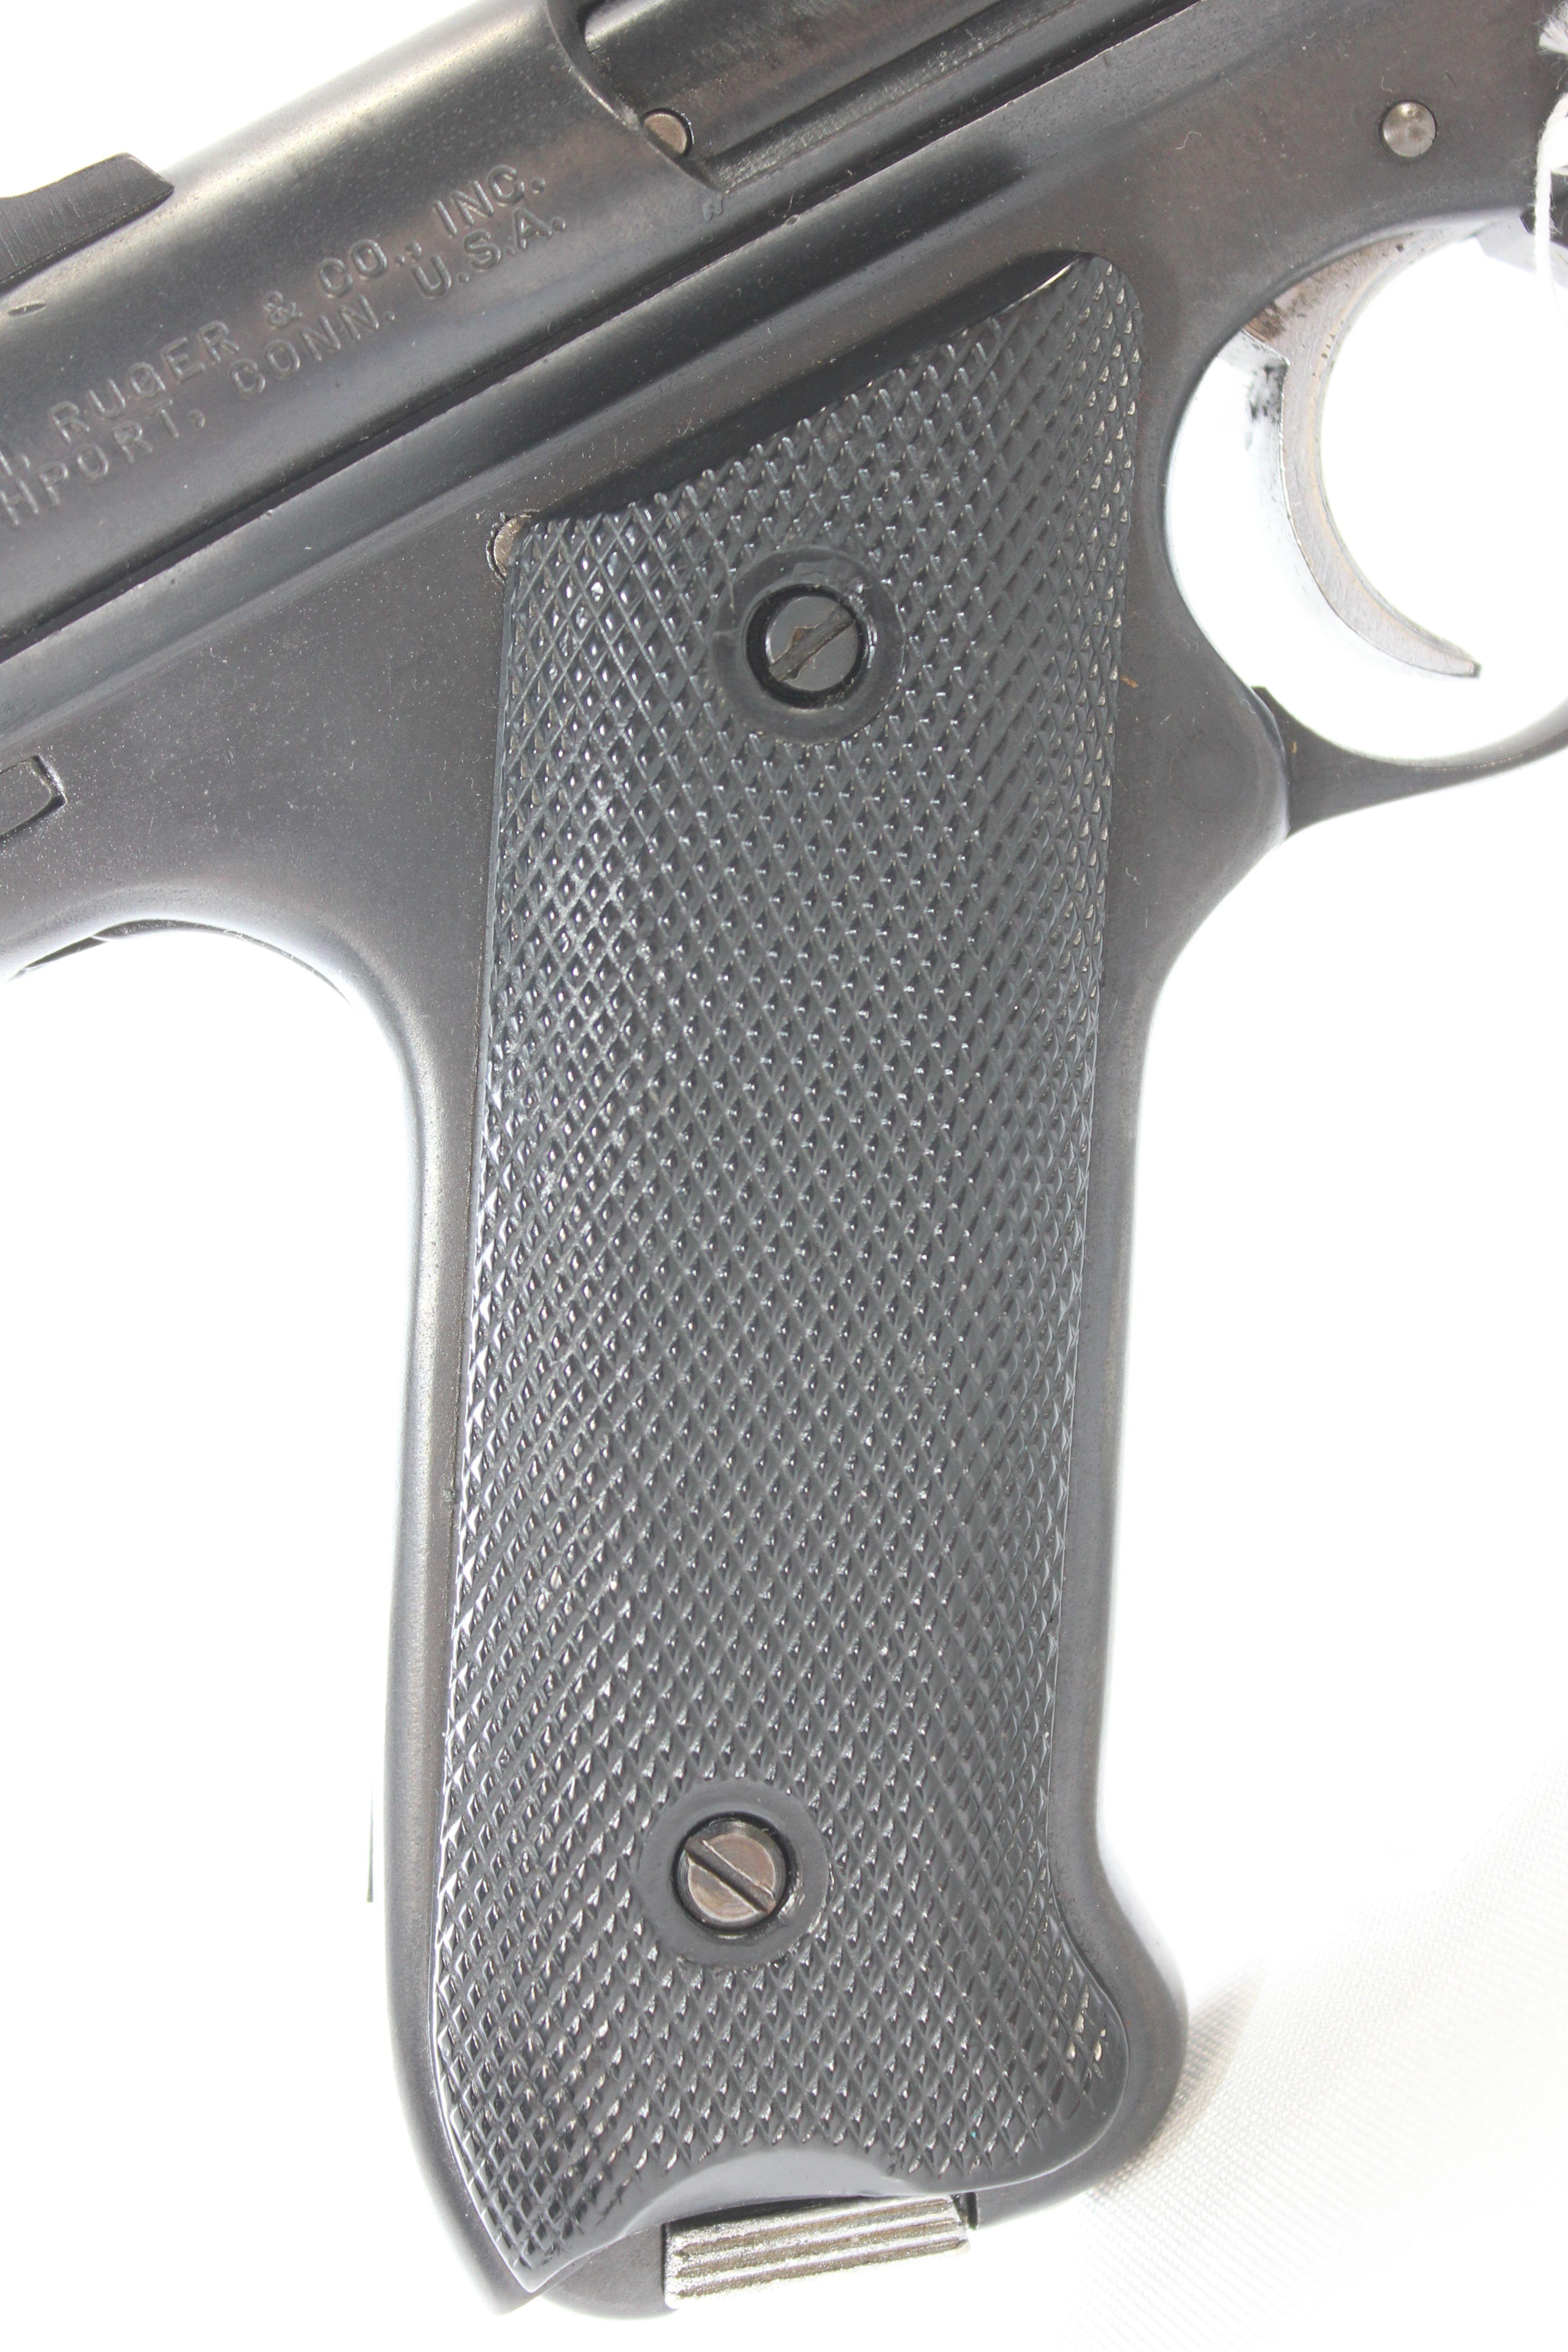 Ruger Silver Eagle Standard MK 1 Model .22 LR Semi-Automatic Pistol w/4-3/4" BBL and 10-Rd. Magazine